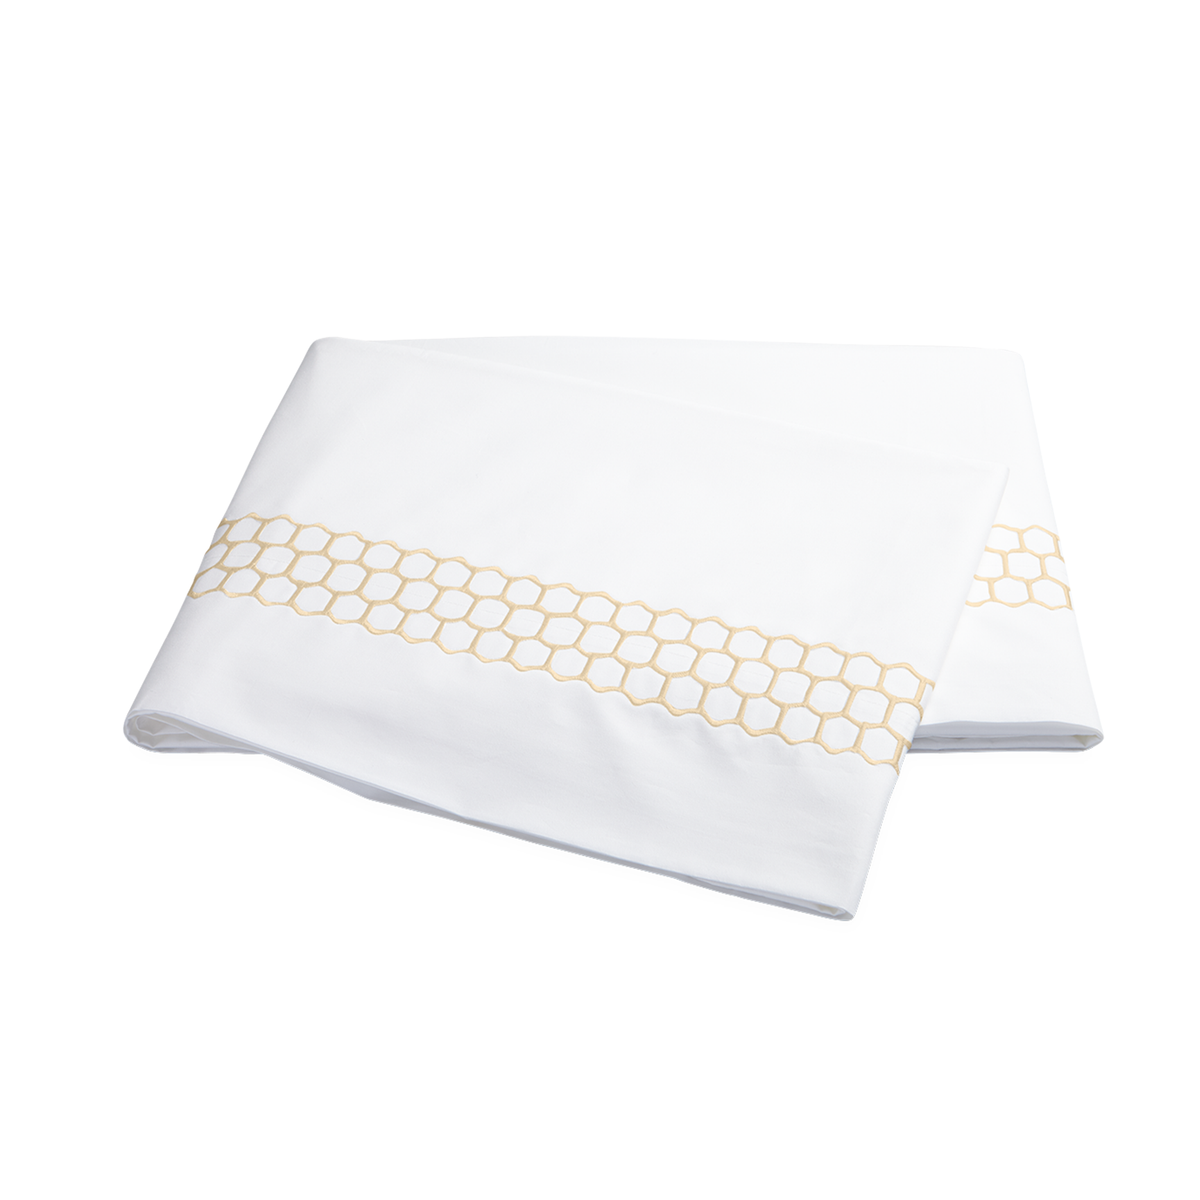 Clear Image of Matouk Liana Bedding Flat Sheet in Champagne Color